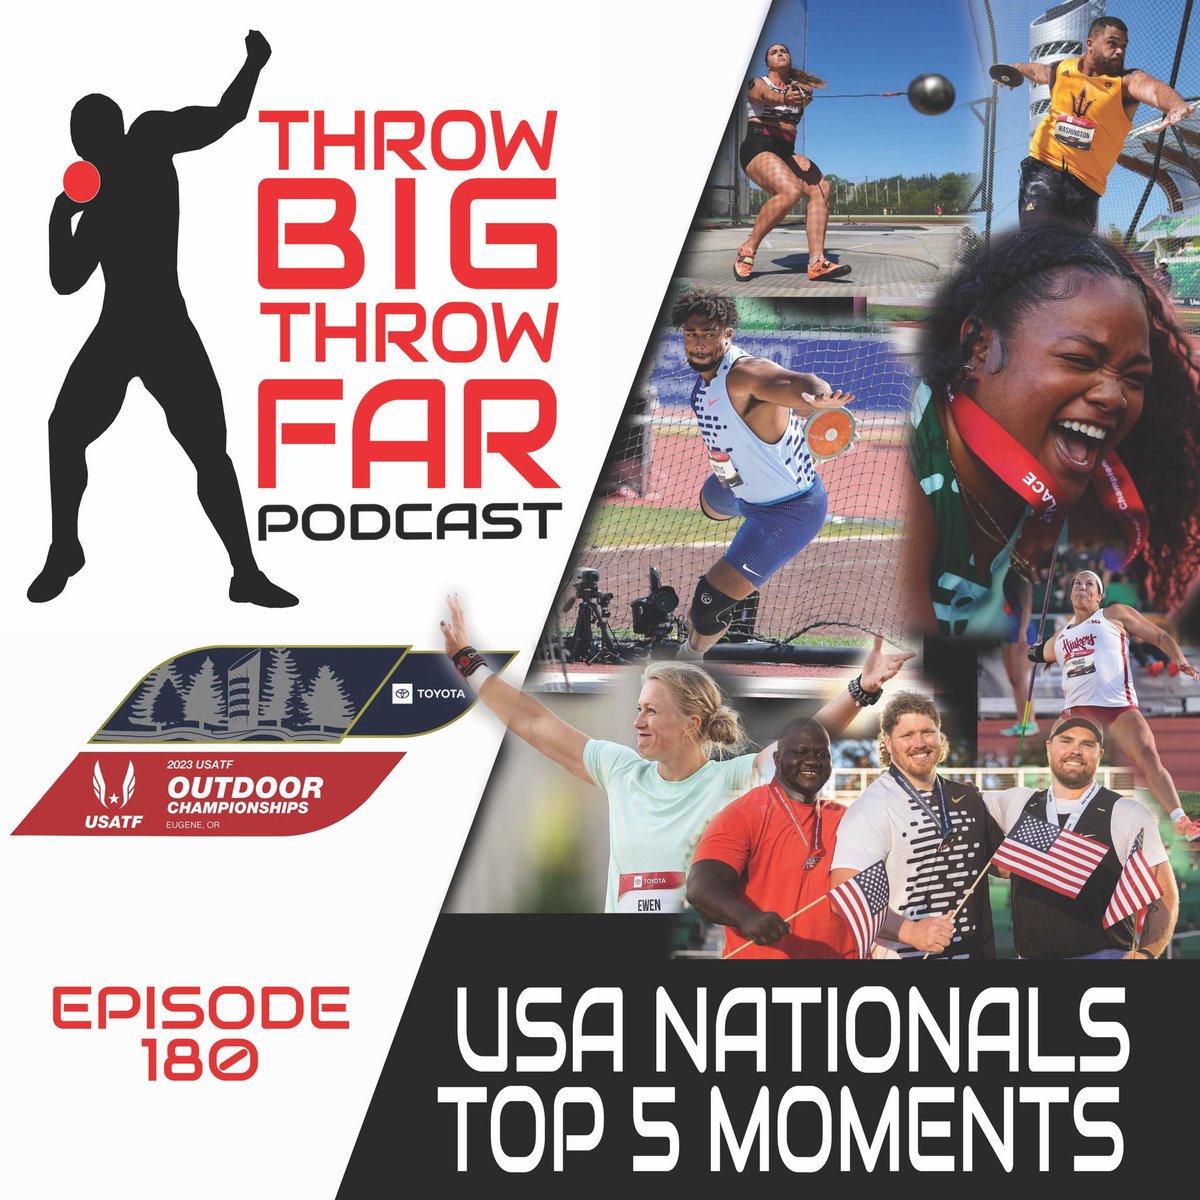 Were our favorite moments yours? @karathrowsjav @McThrows and @JosephFrontier each share their favorite 5 throws performances of the Outdoor Championships … listen now! podcasts.apple.com/us/podcast/thr…